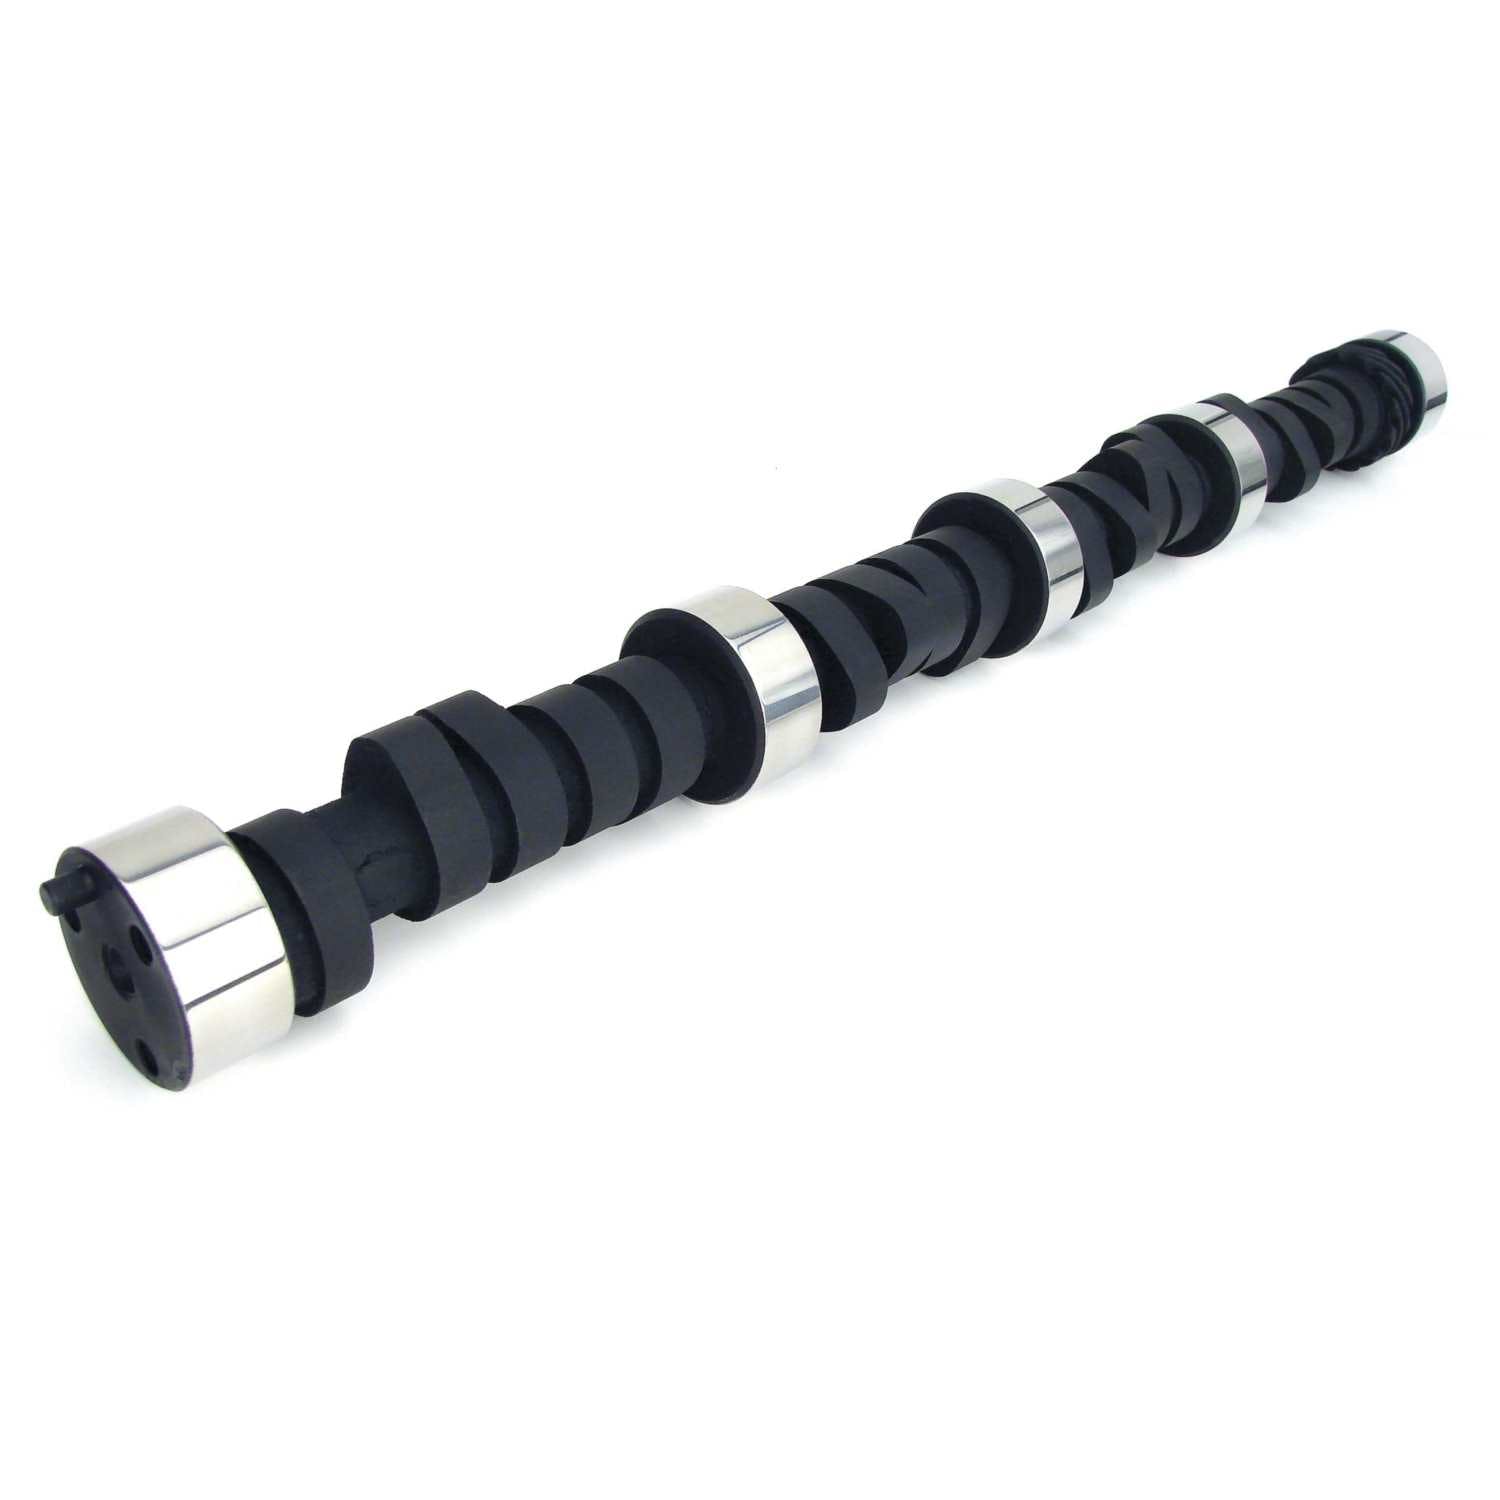 Competition Cams 11-106-3 Factory Muscle Camshaft